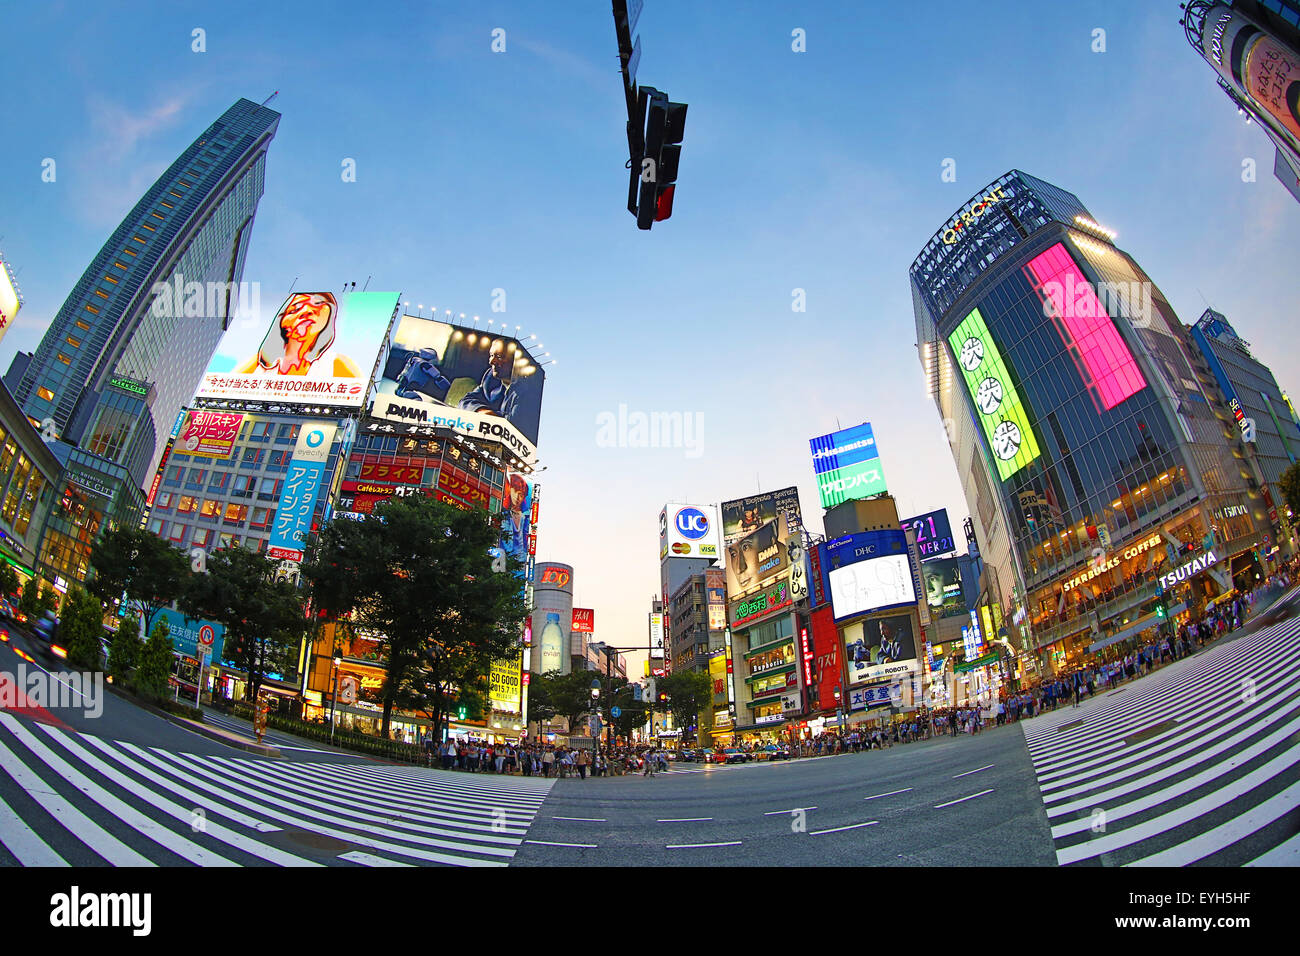 Sunset at the pedestrian crossing at the intersection in Shibuya, Tokyo, Japan Stock Photo